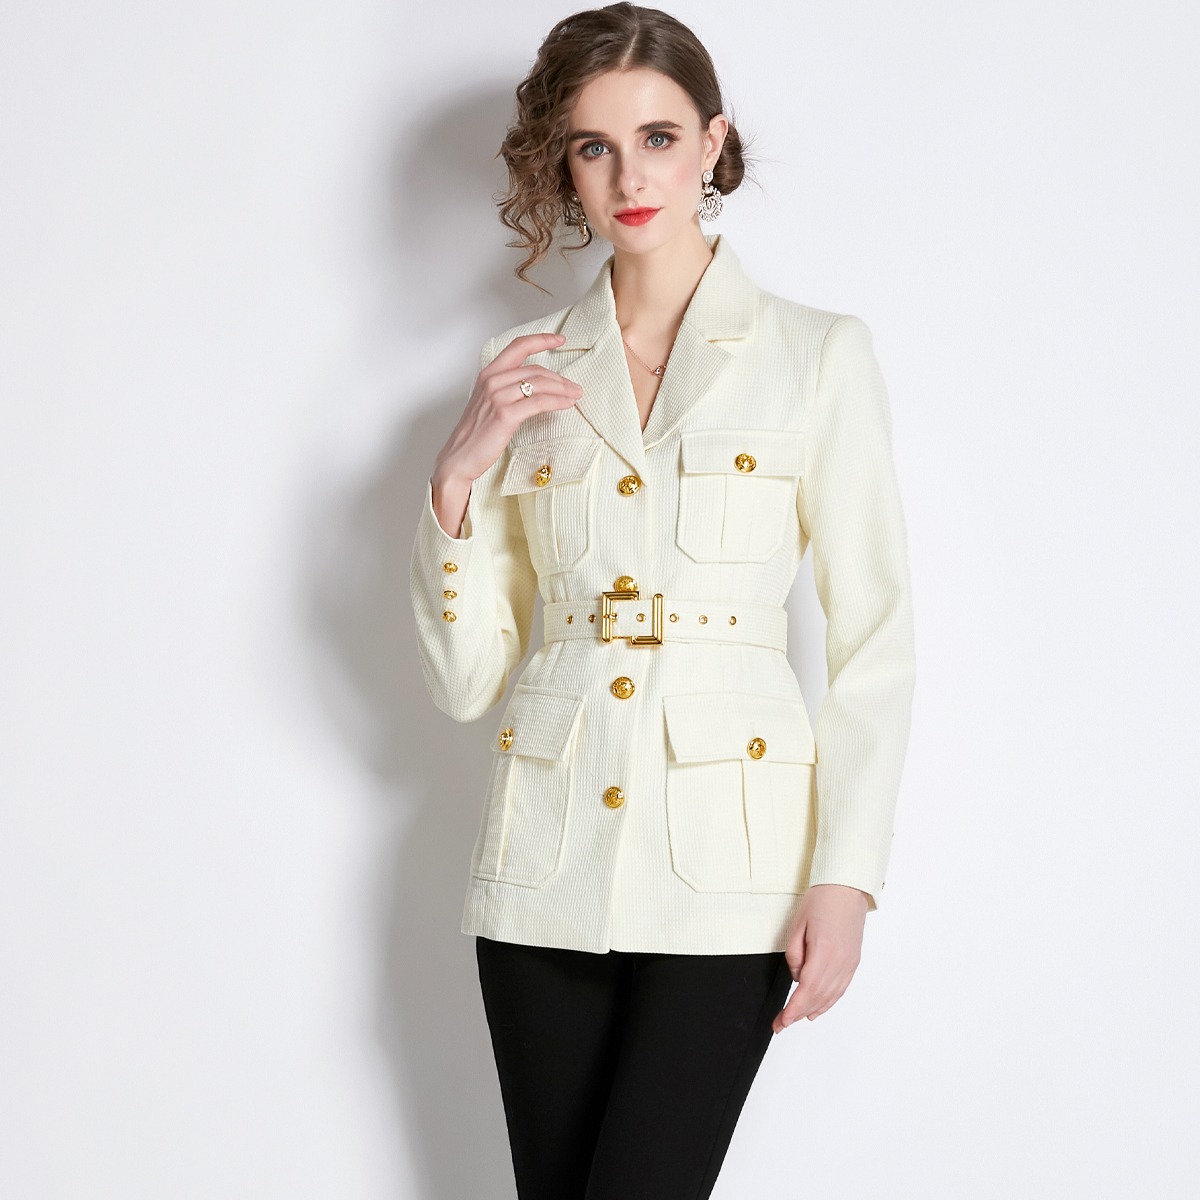 European style France style coat slim autumn and winter tops